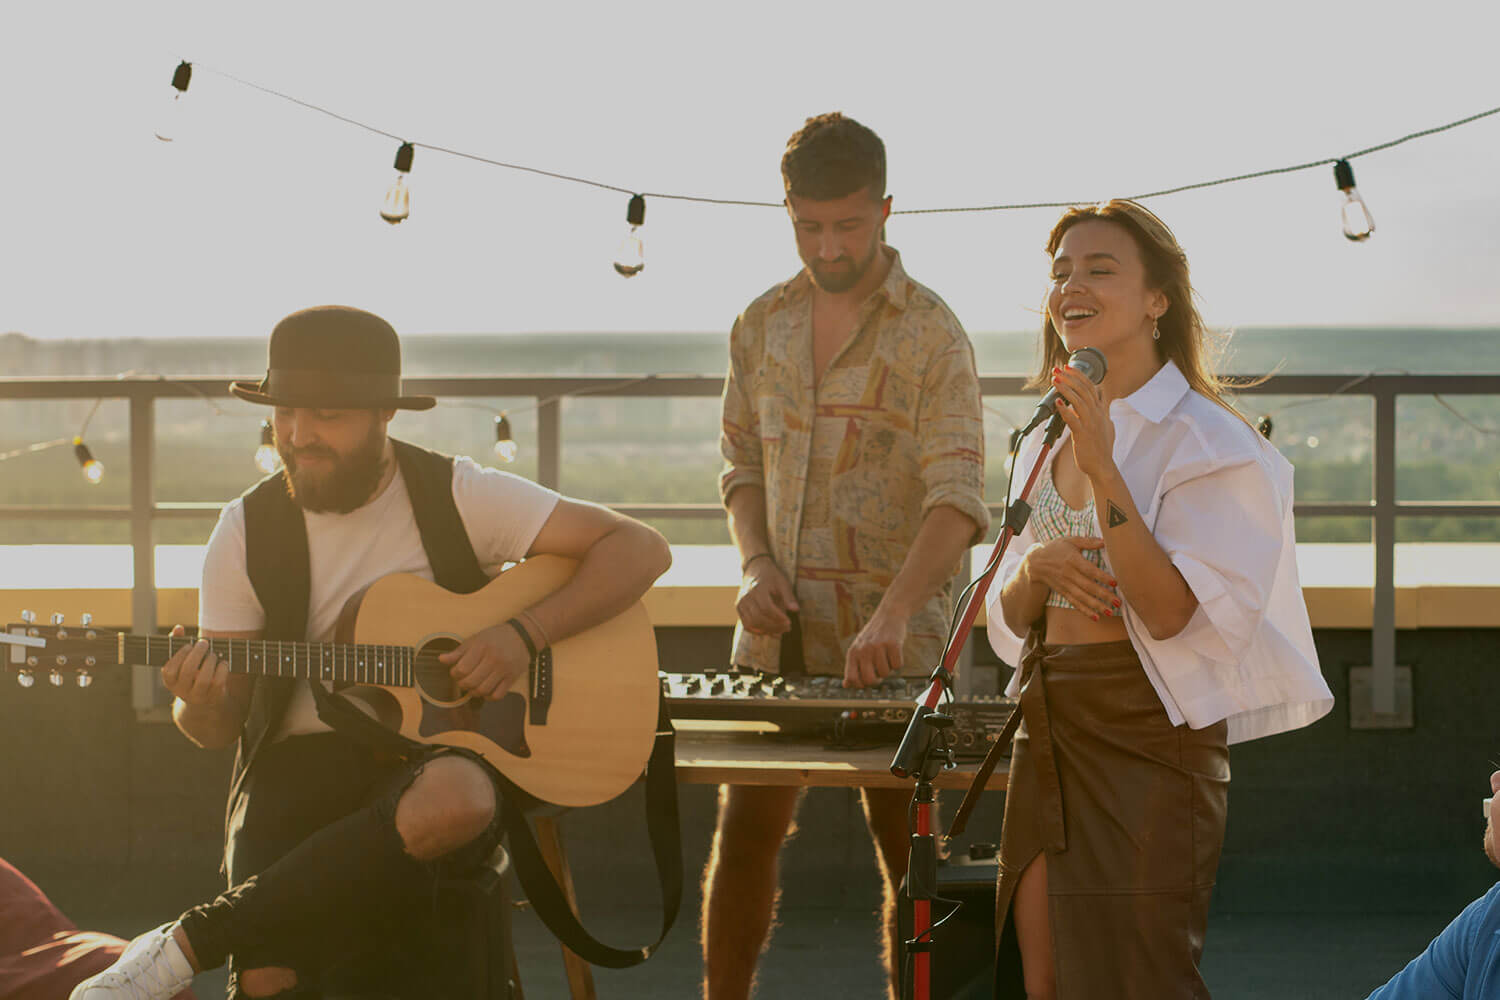 Music group performing at a rooftop party